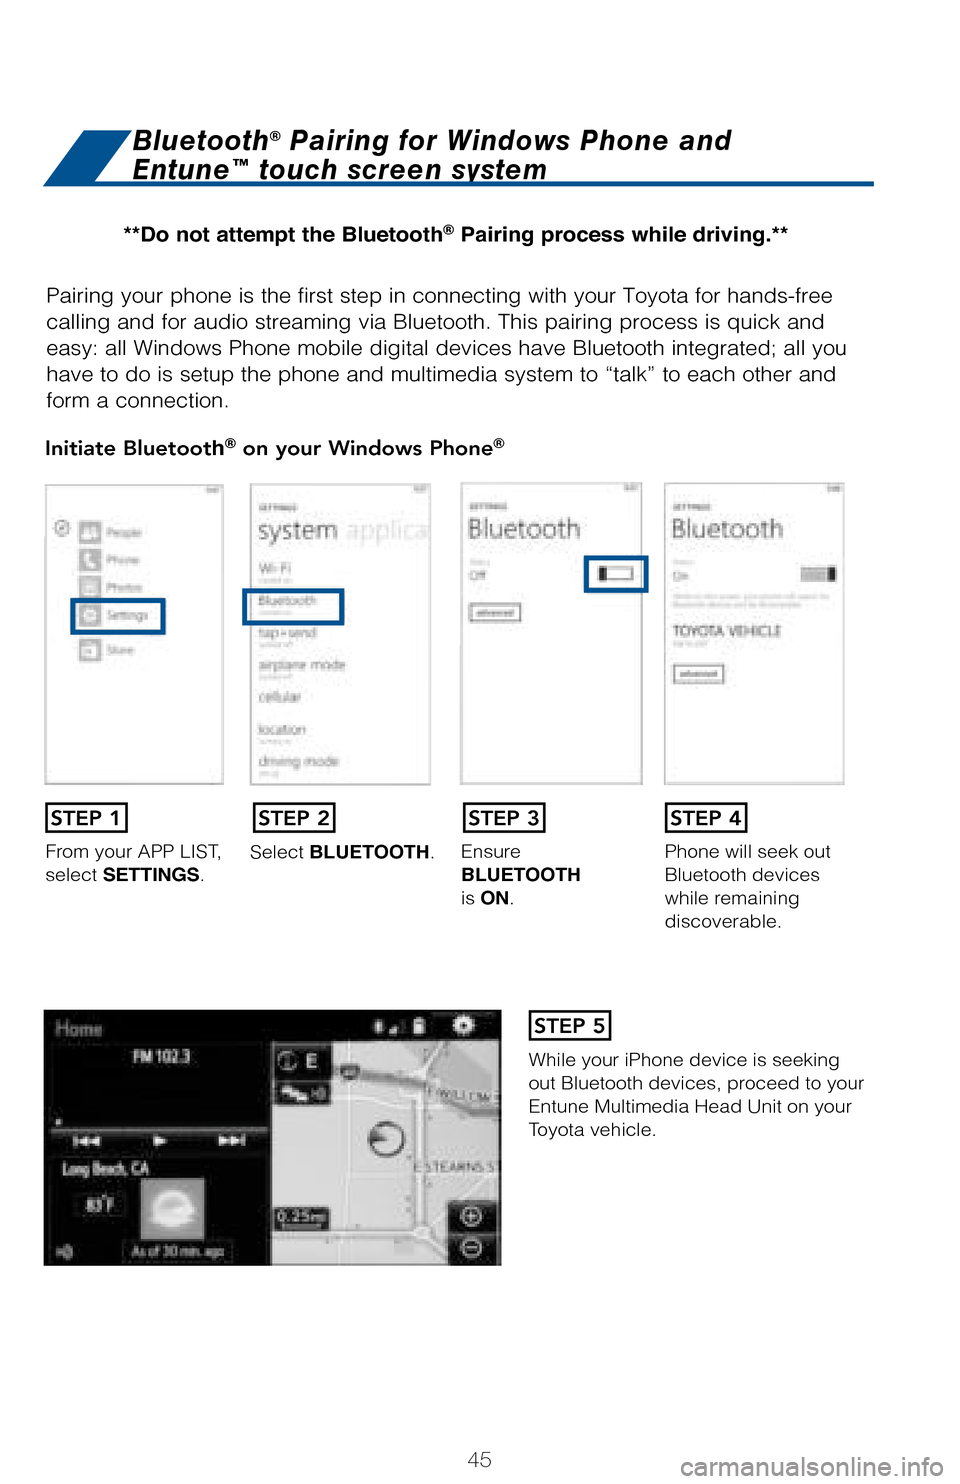 TOYOTA COROLLA 2017 11.G Quick Reference Guide 45
Pairing your phone is the first step in connecting with your Toyota for hands-free  
calling and for audio streaming via Bluetooth. This pairing process is quick and 
easy: all Windows Phone mobile